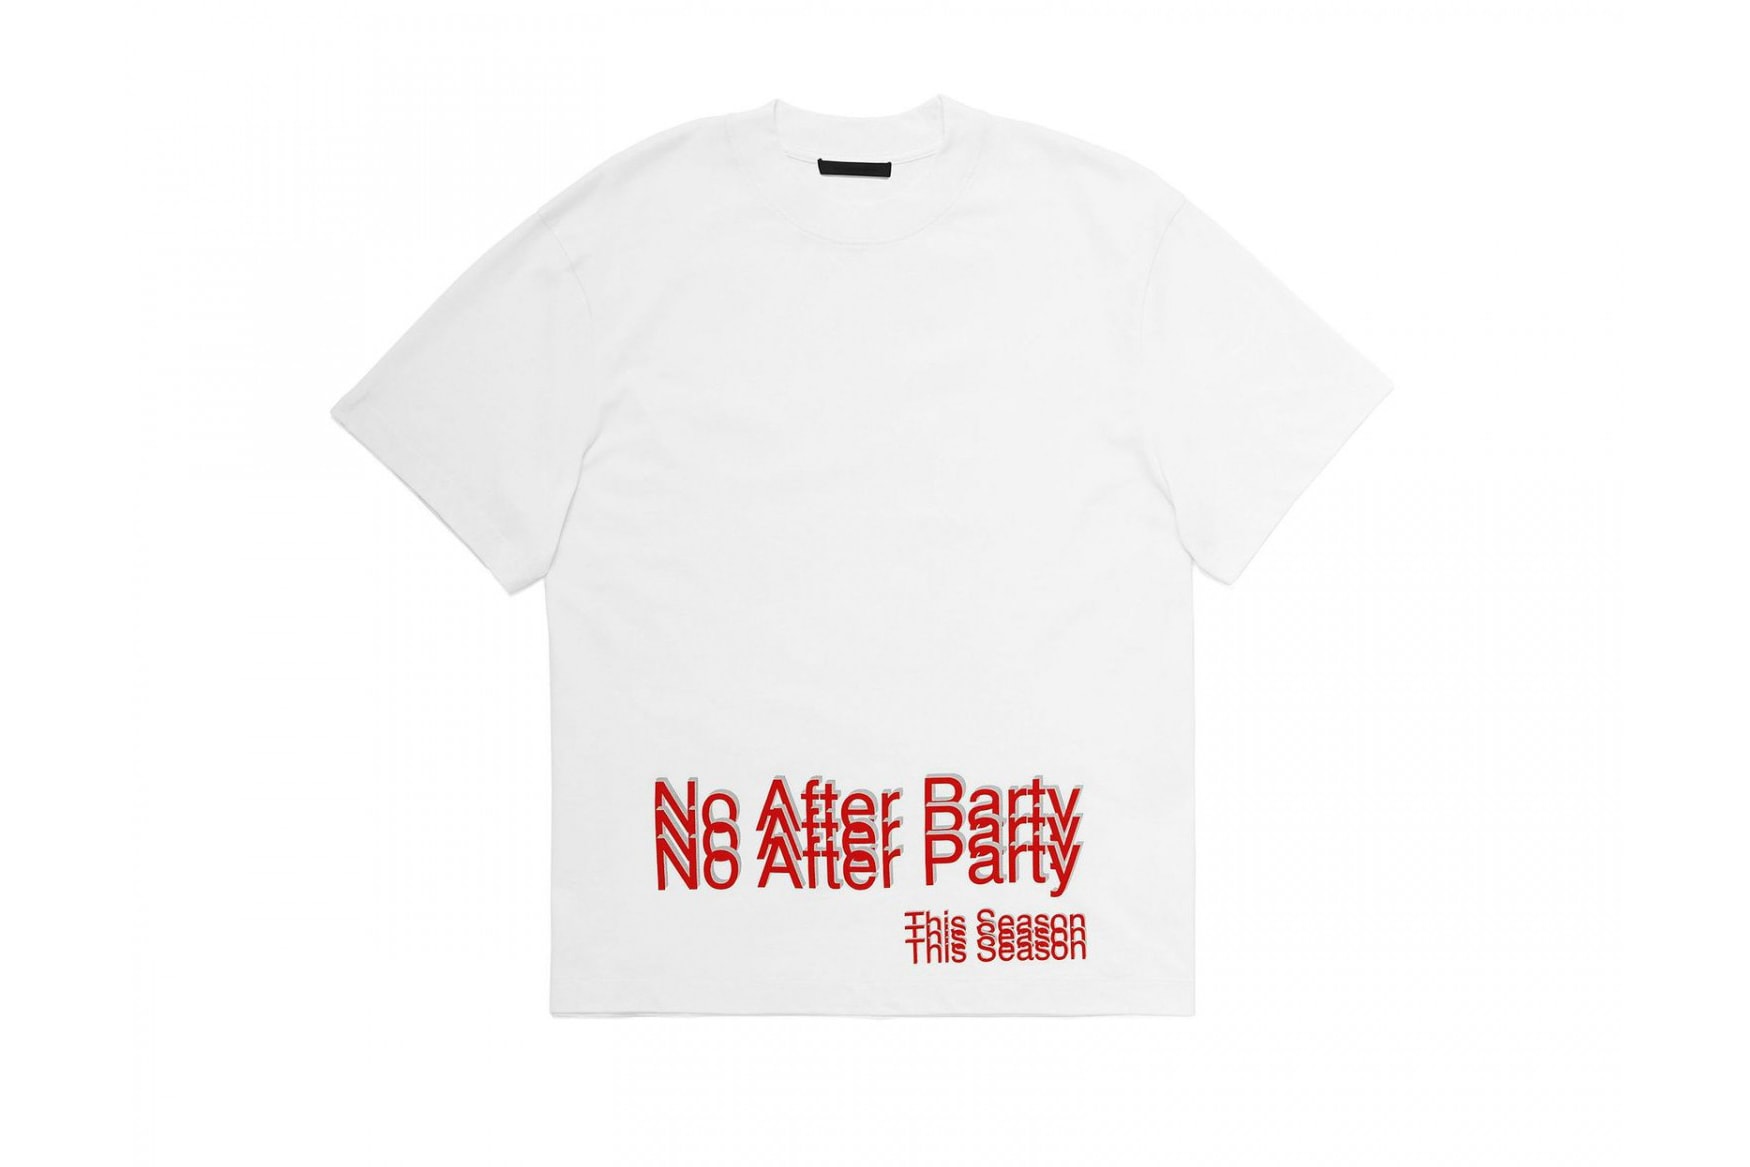 Alexander Wang 2017 "No After Party" Capsule Collection